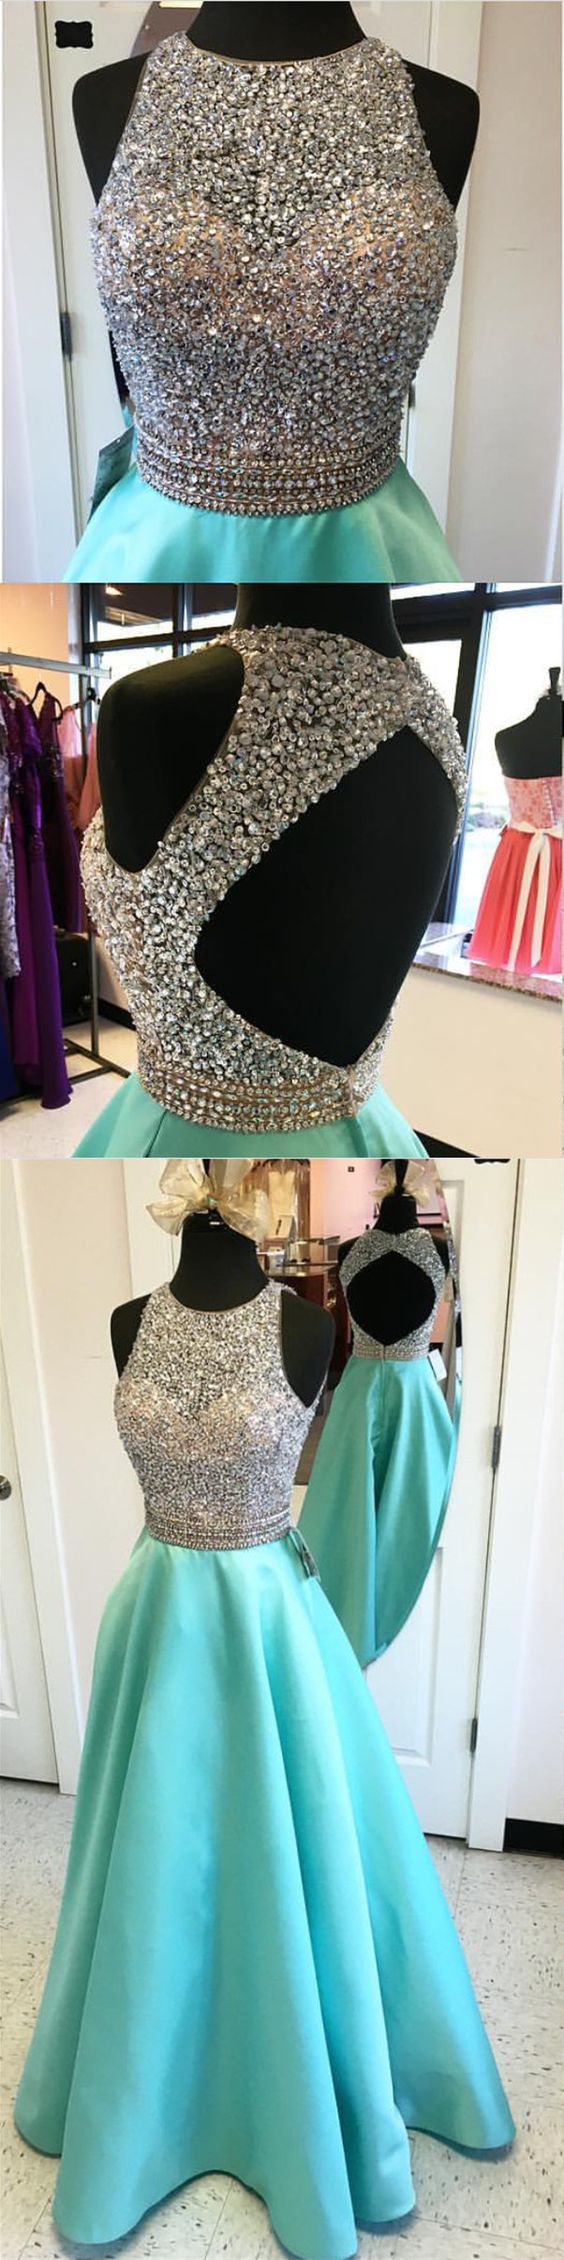 Jewelry Neck Long Prom Dress,satin Turquoise Prom Dresses,blue Prom Dresses,backless Evening Gowns,2018 Sesy Backless Formal Evening Dresses,